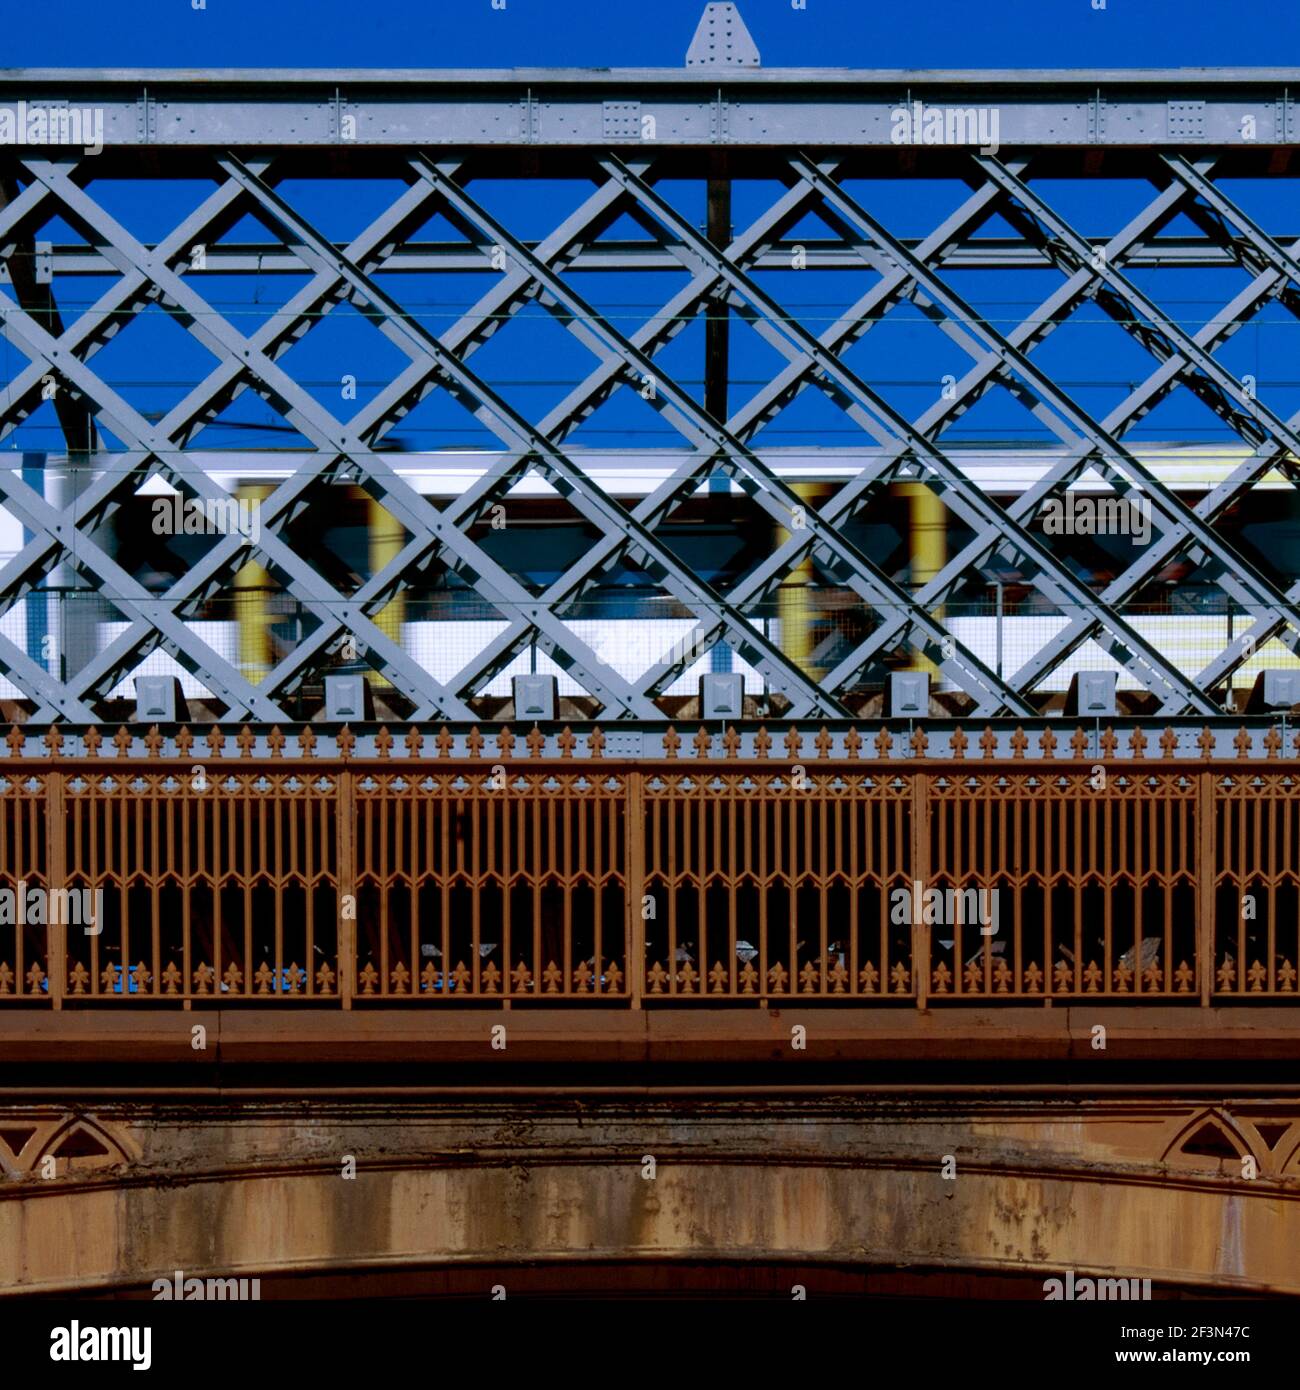 Castlefield District Manchester. Cast Iron Bridge of the Southern Viaduct spanning the Rochdale Canal | Architect: William Baker 1849 | Designer: Manc Stock Photo